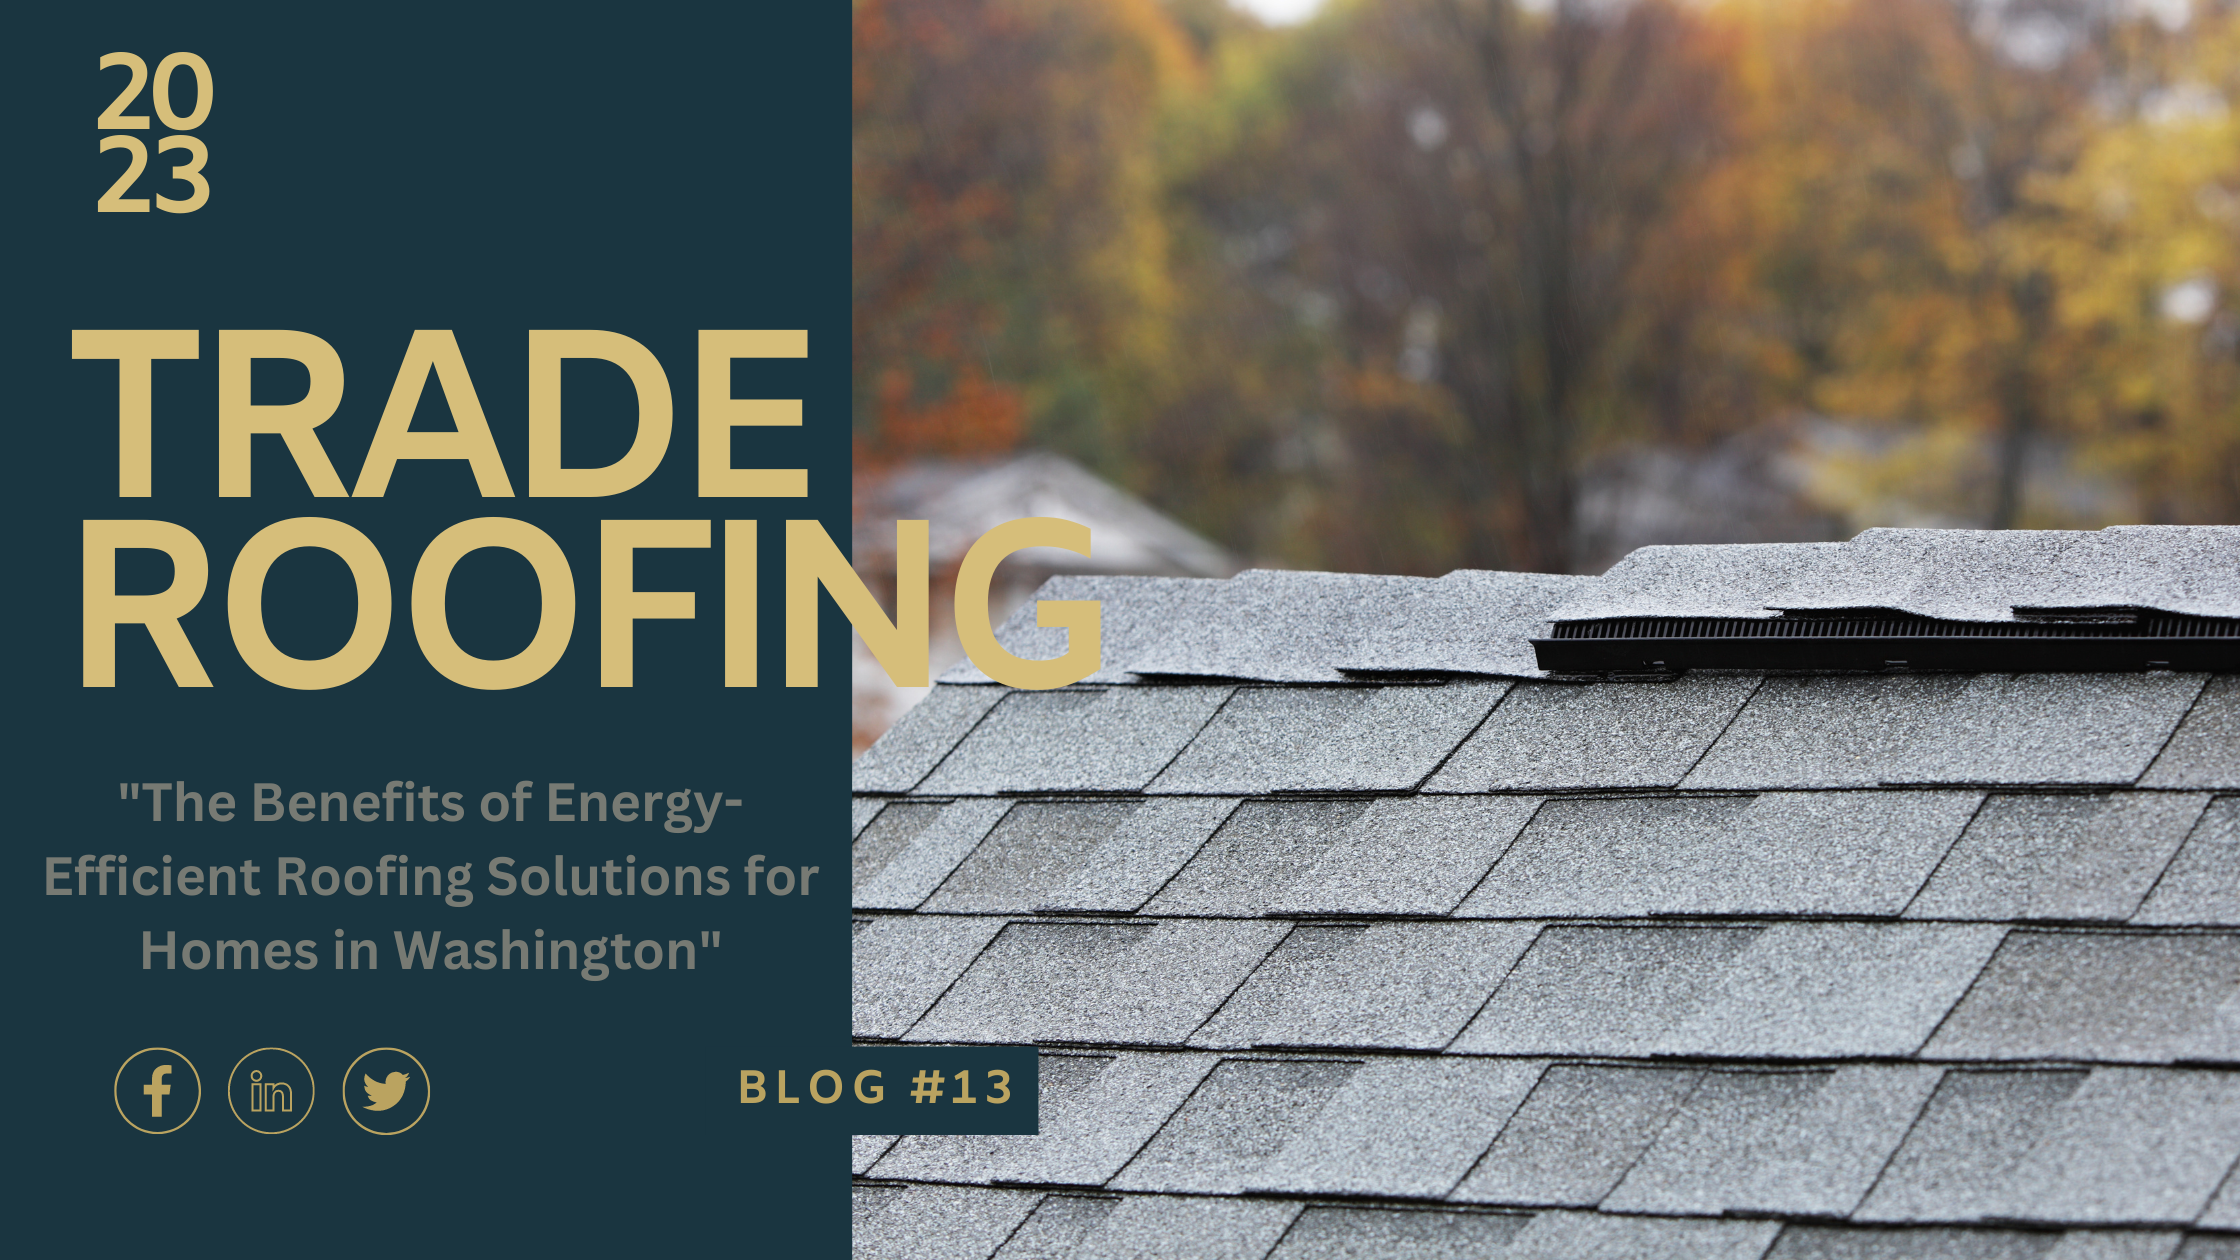 The Benefits of Energy-Efficient Roofing Solutions for Homes in Washington